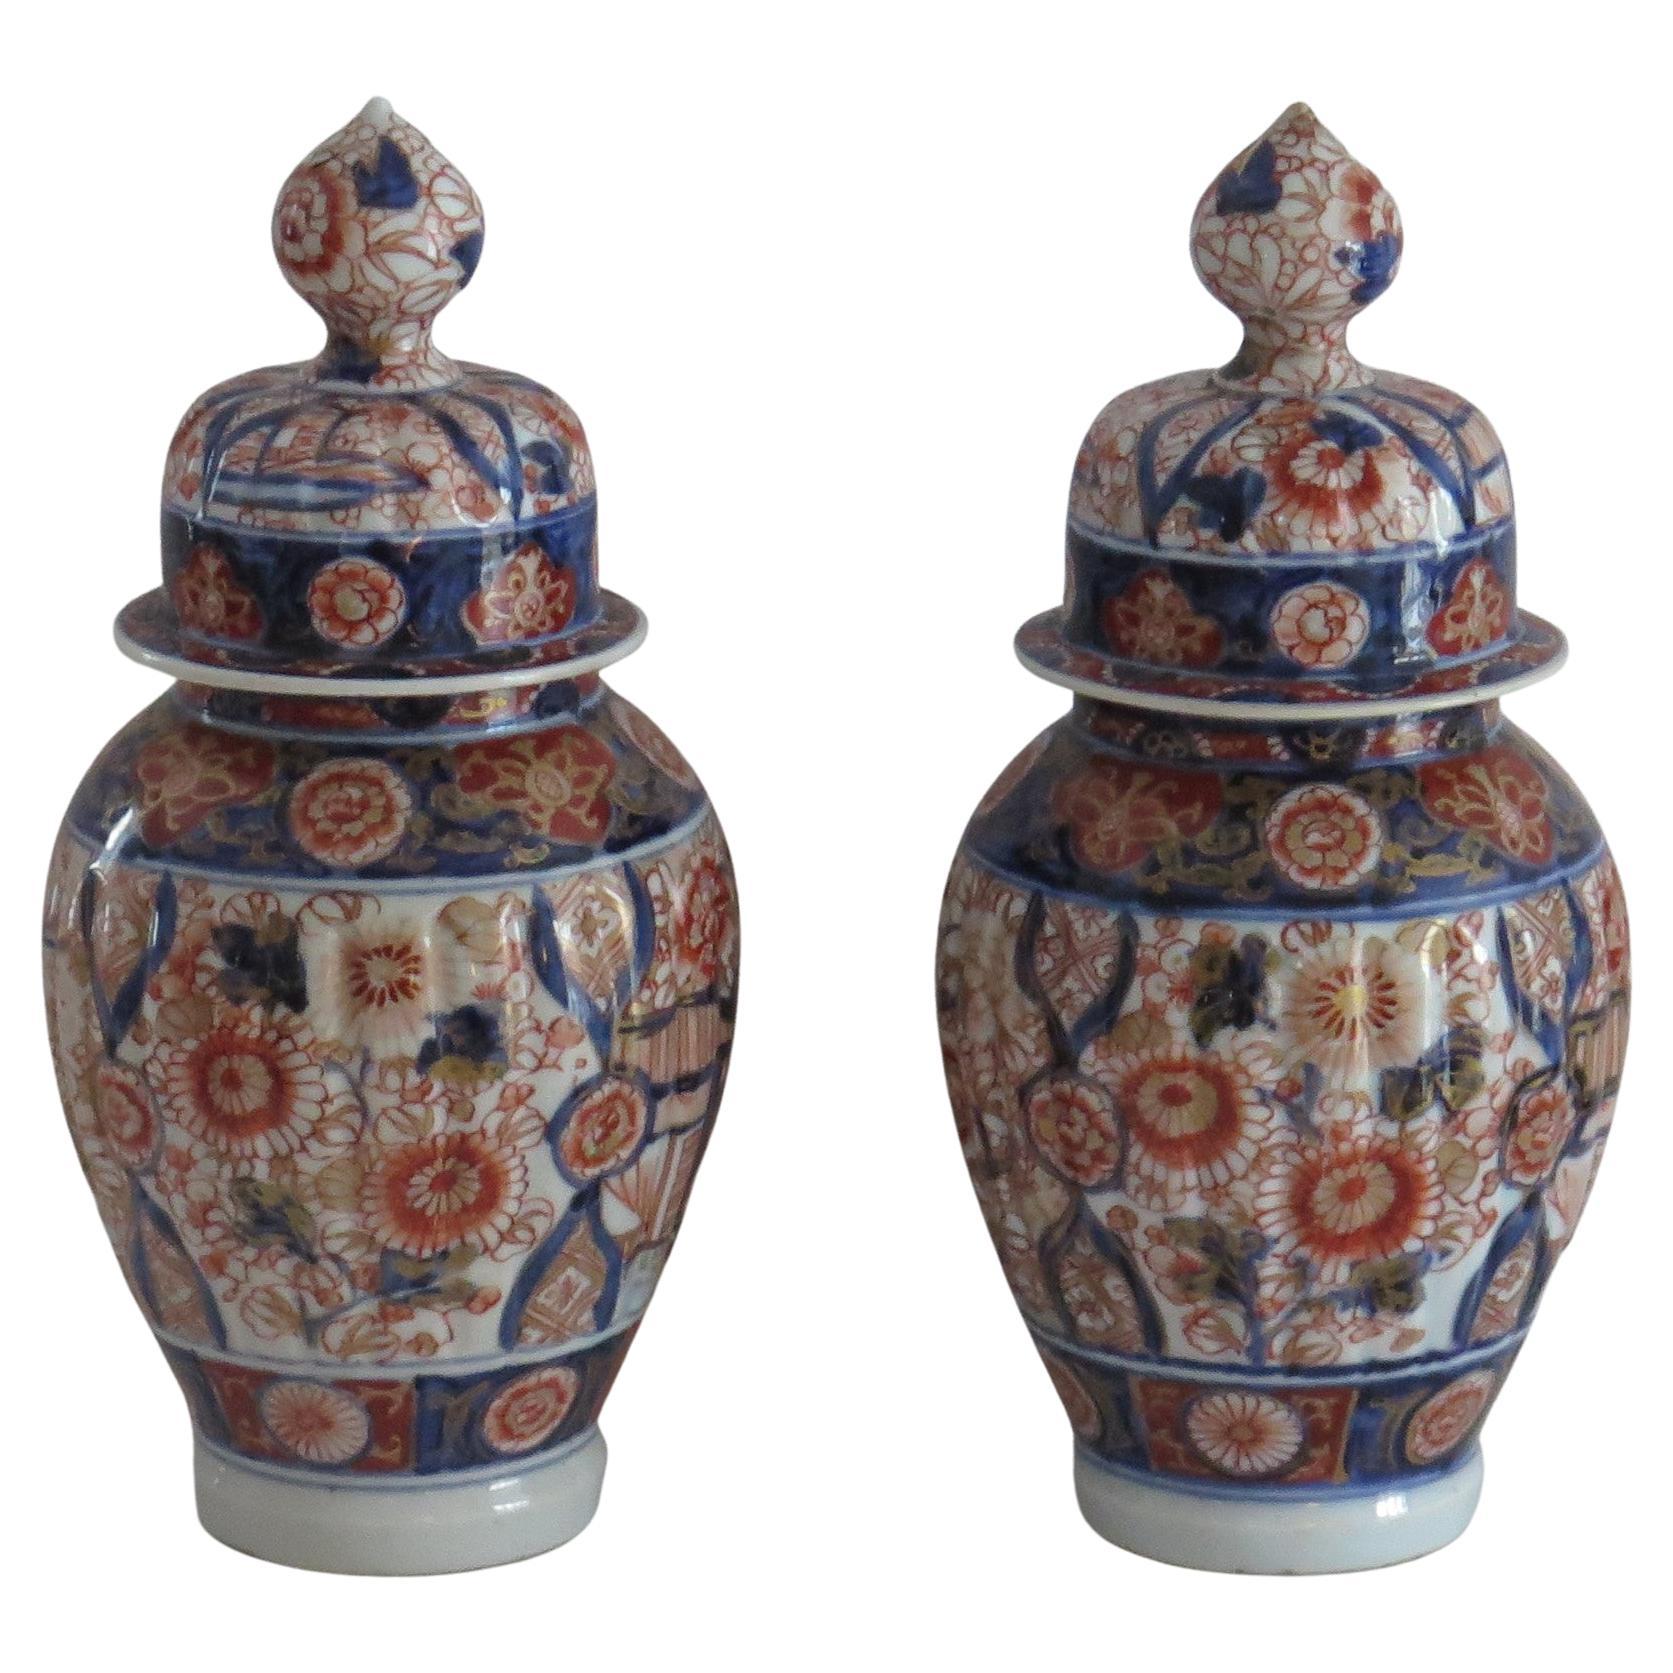 These are a high quality pair of very decorative gilded hand enameled Japanese porcelain lidded vases which we date to the Edo period of the 19th century, circa 1830.

Each vase has a baluster open necked shape and has been hand painted in an Imari